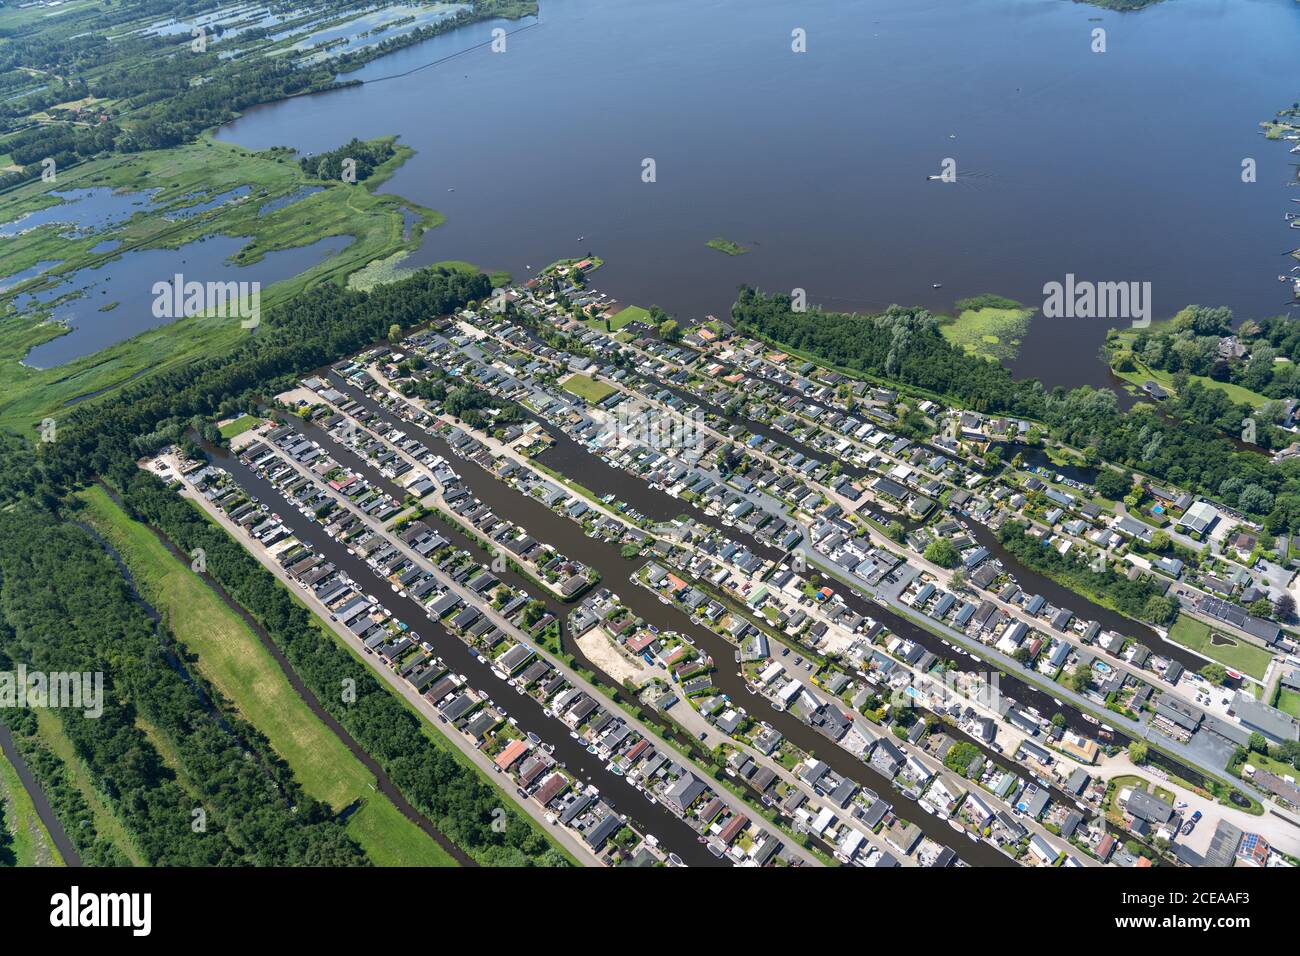 The Netherlands from above with green fields, rivers and houses on the water Stock Photo